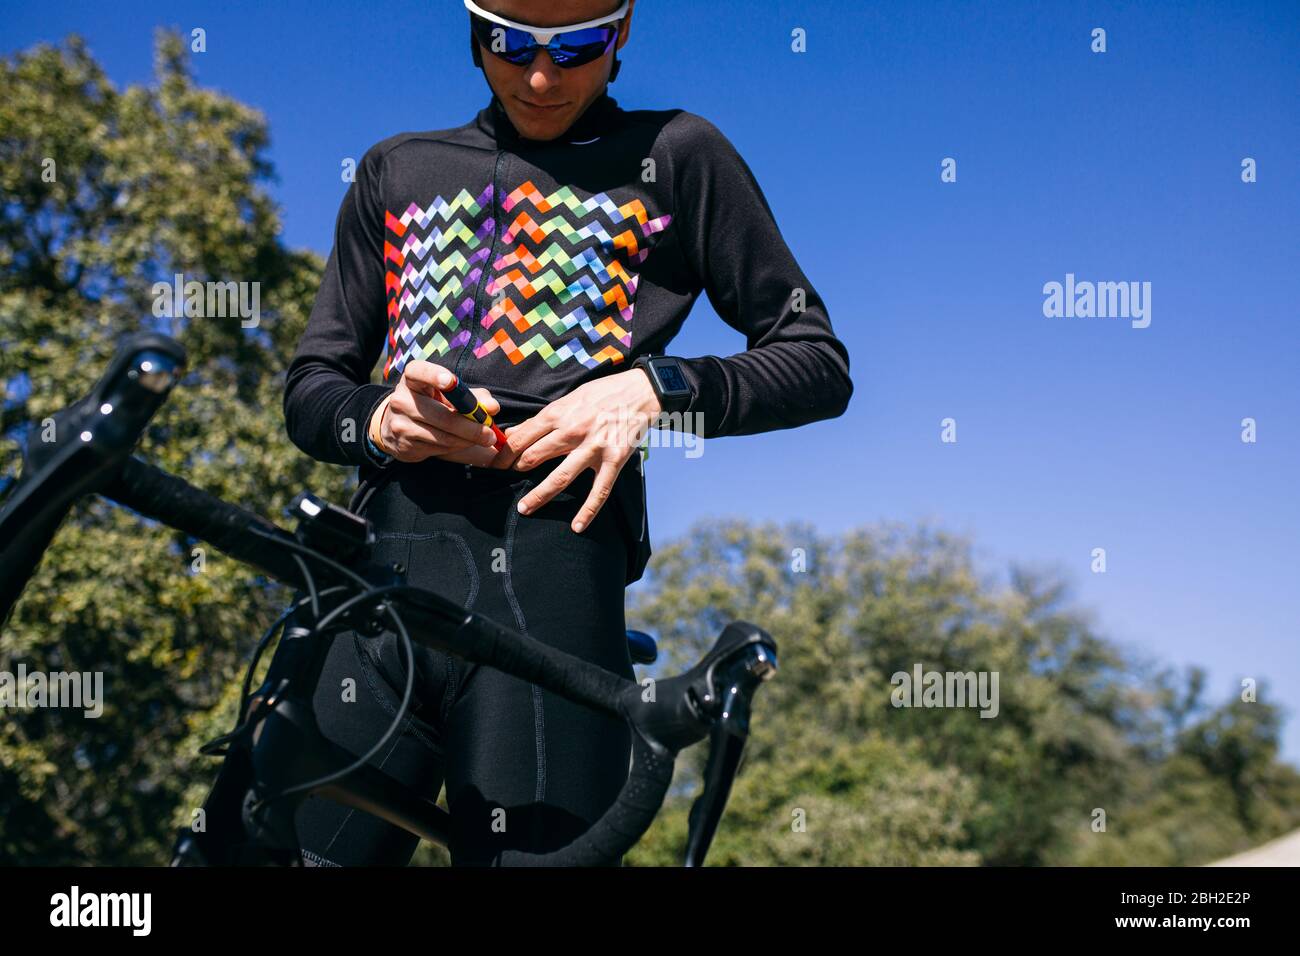 Diabetic cyclist injecting insulin before starting his ride Stock Photo